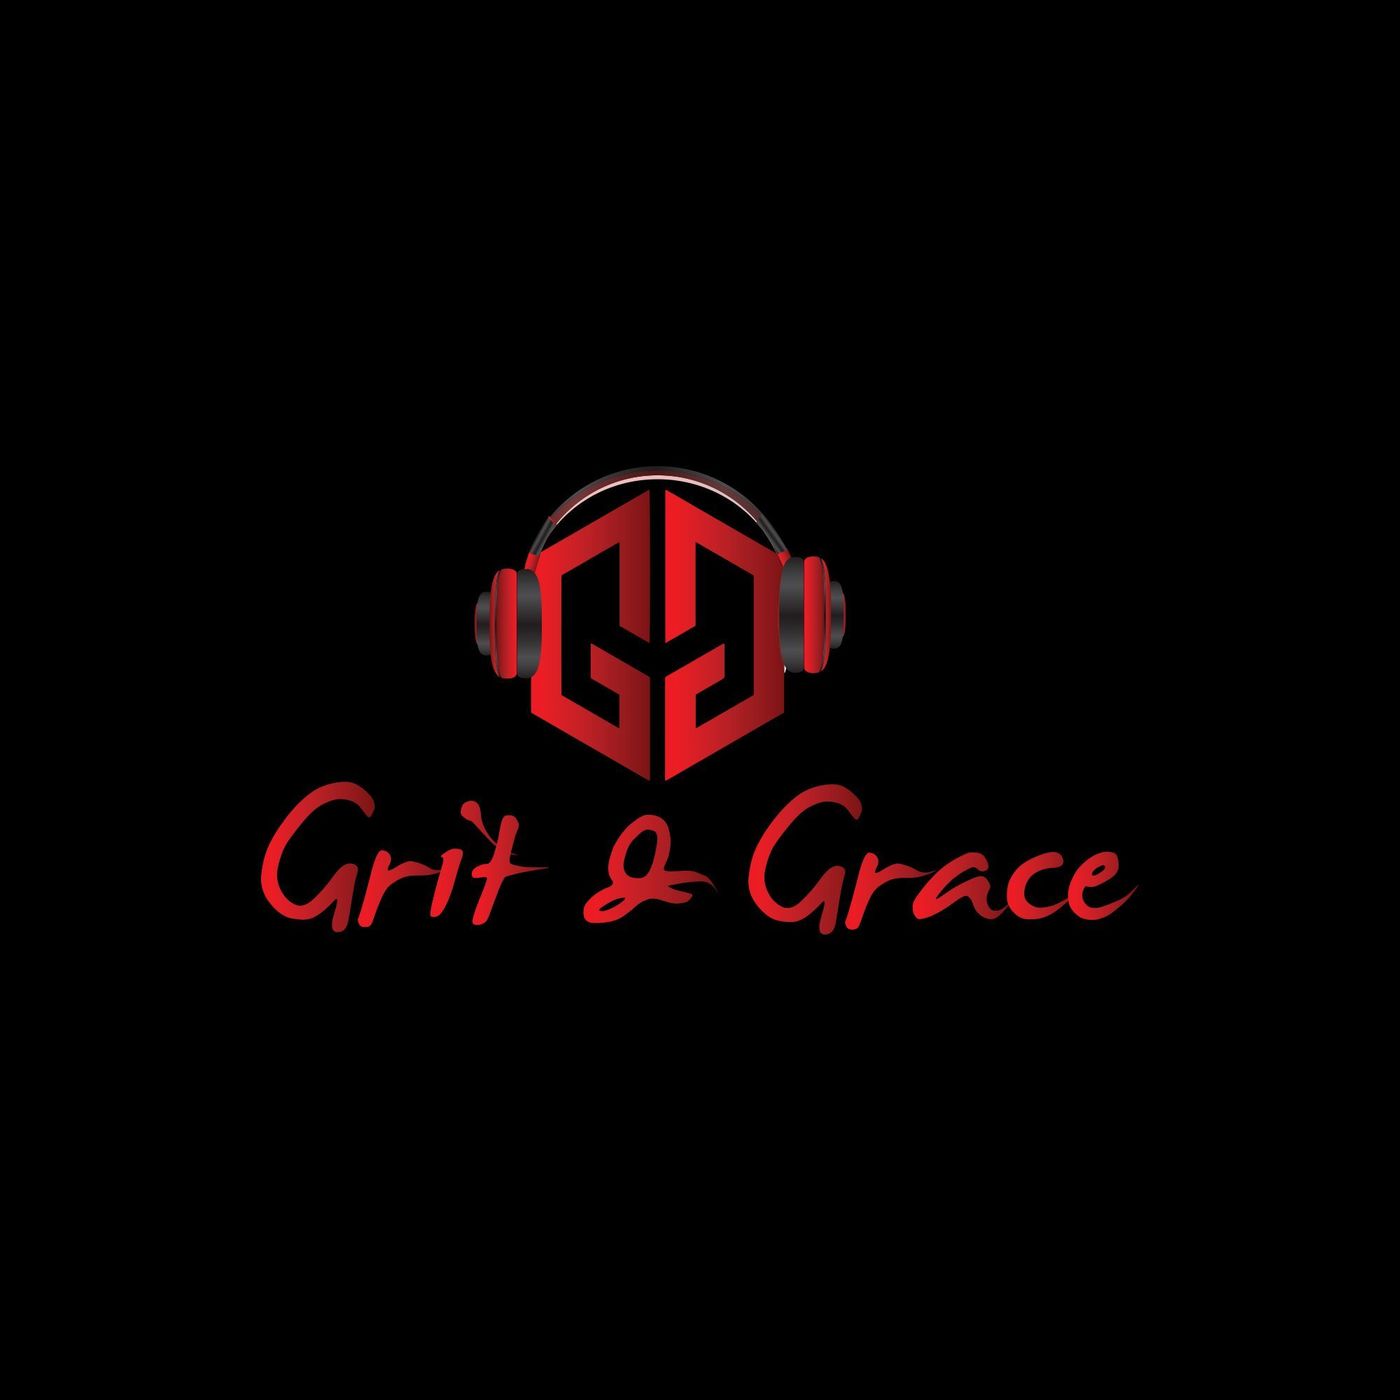 Grit and Grace: Crushing Cancer Image